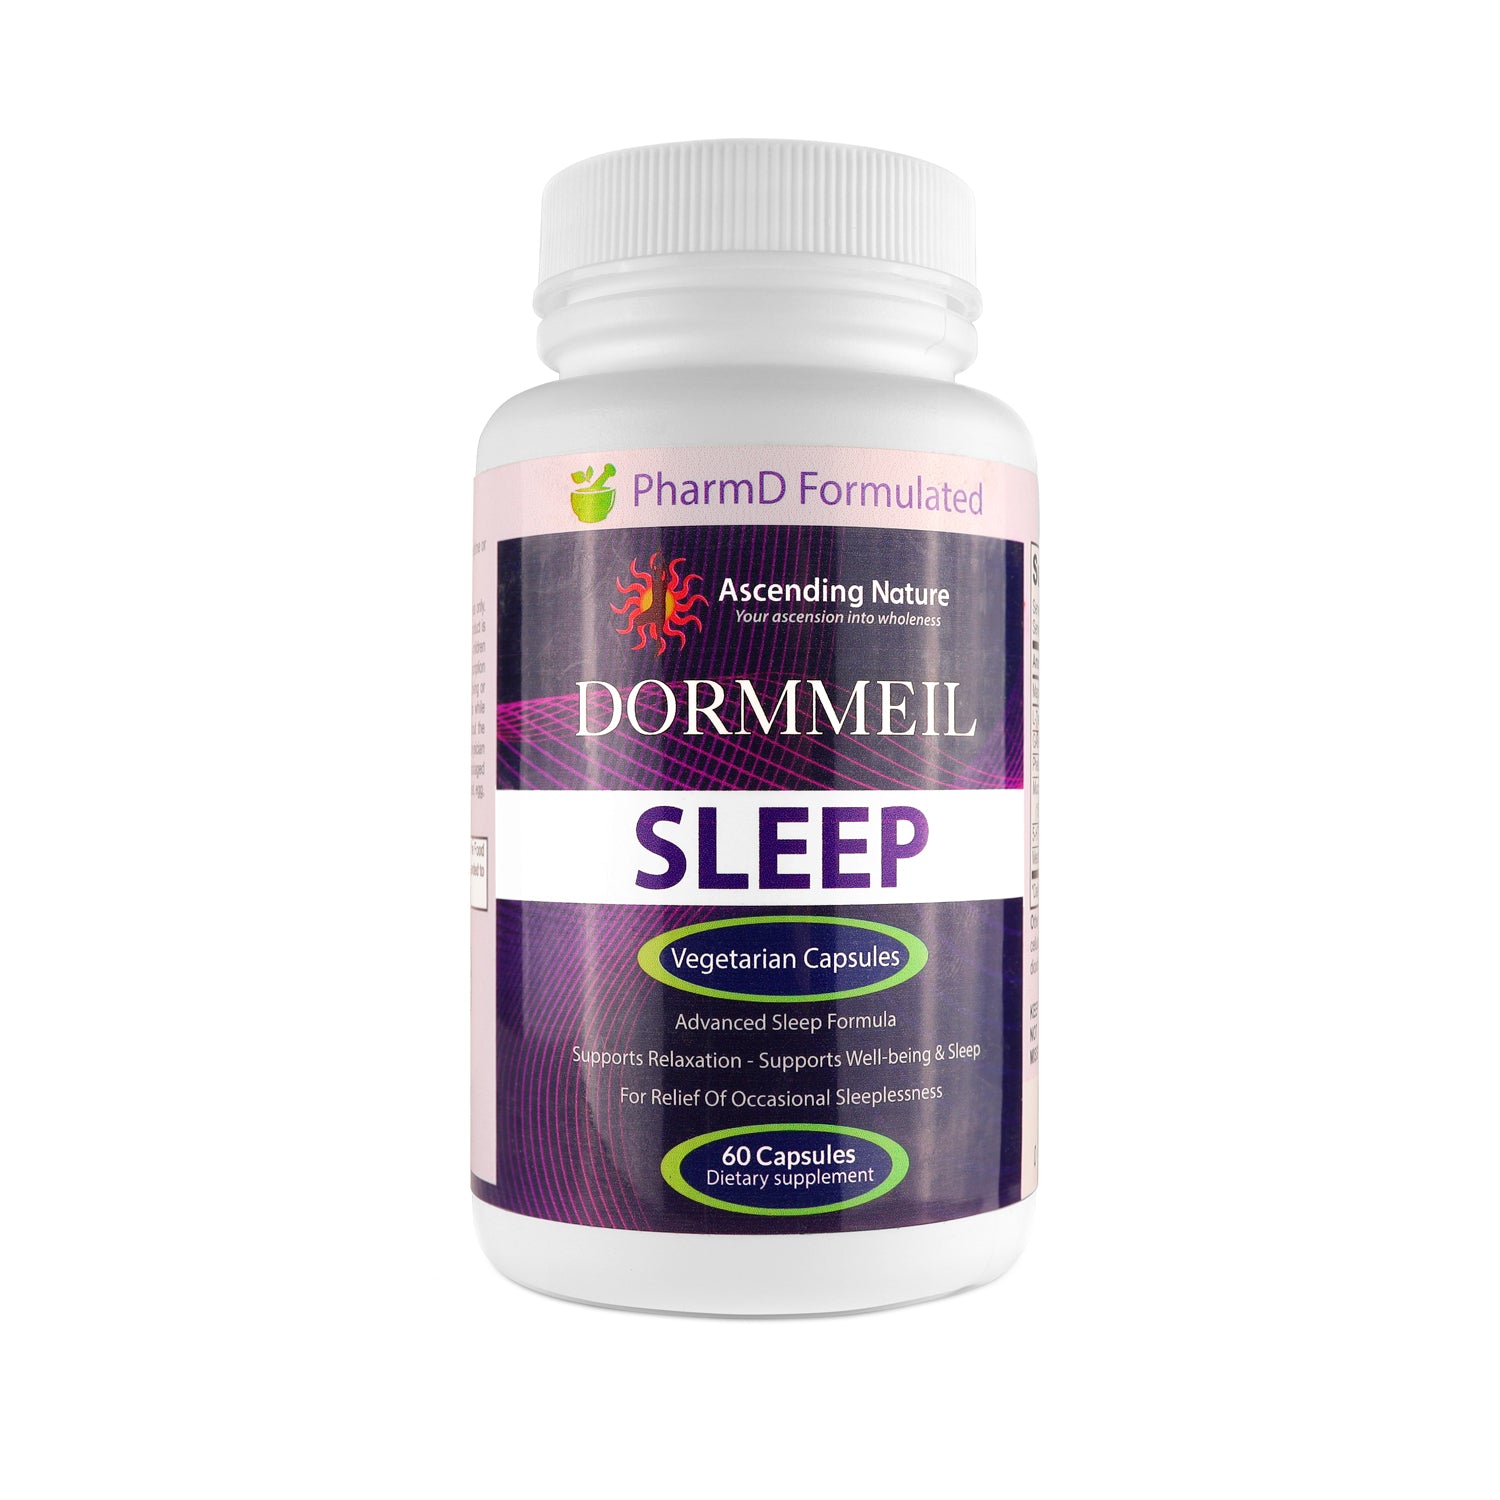 Dormmeil Sleep The Natural Sleep Supplement: What Do You Need to Know!